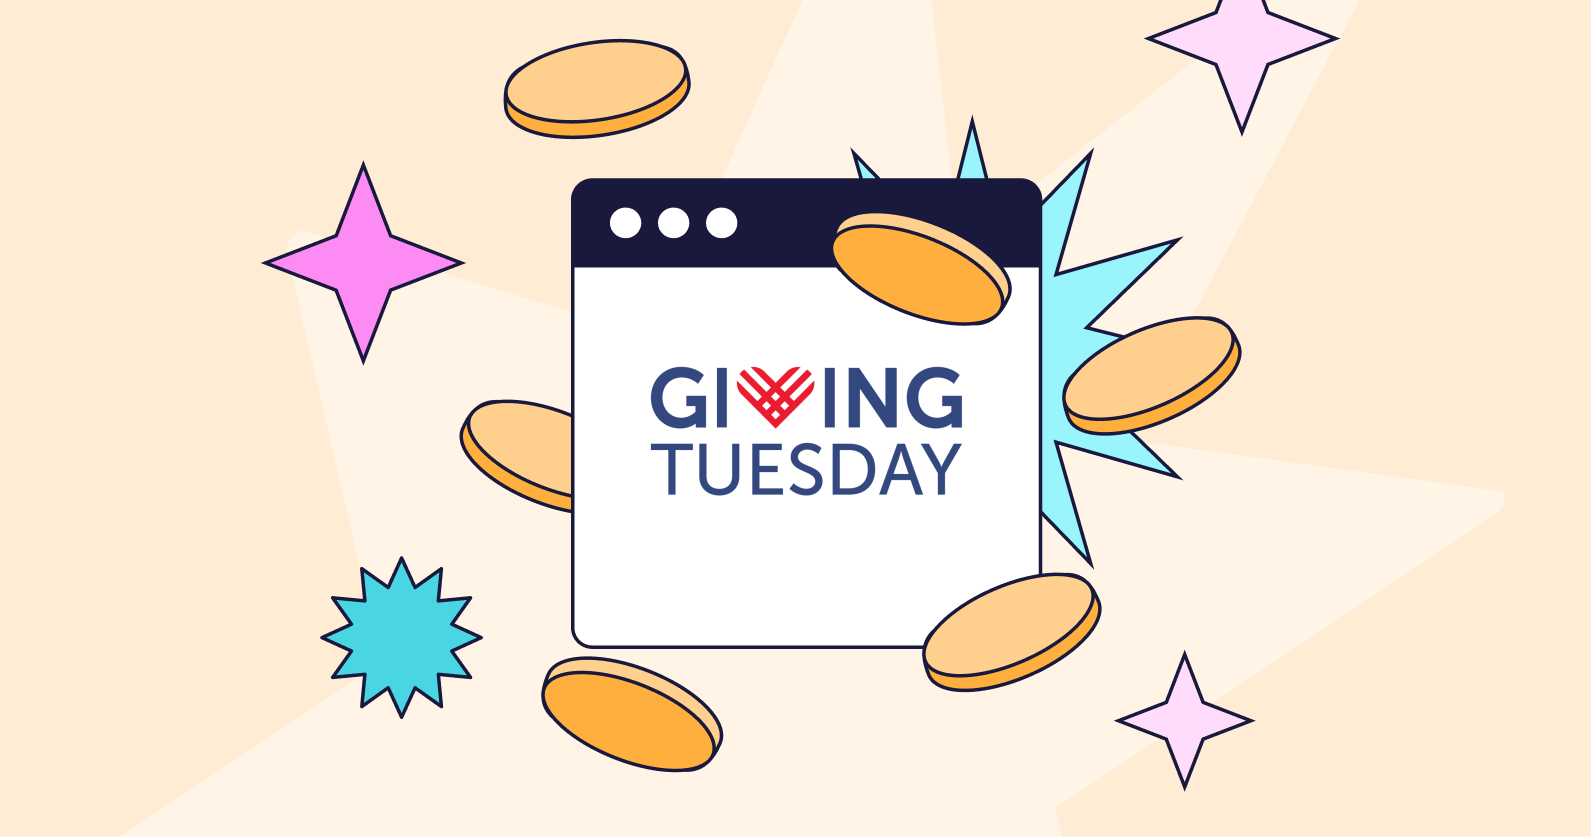 Illustration of a GivingTuesday campaign with coins and stars around it.